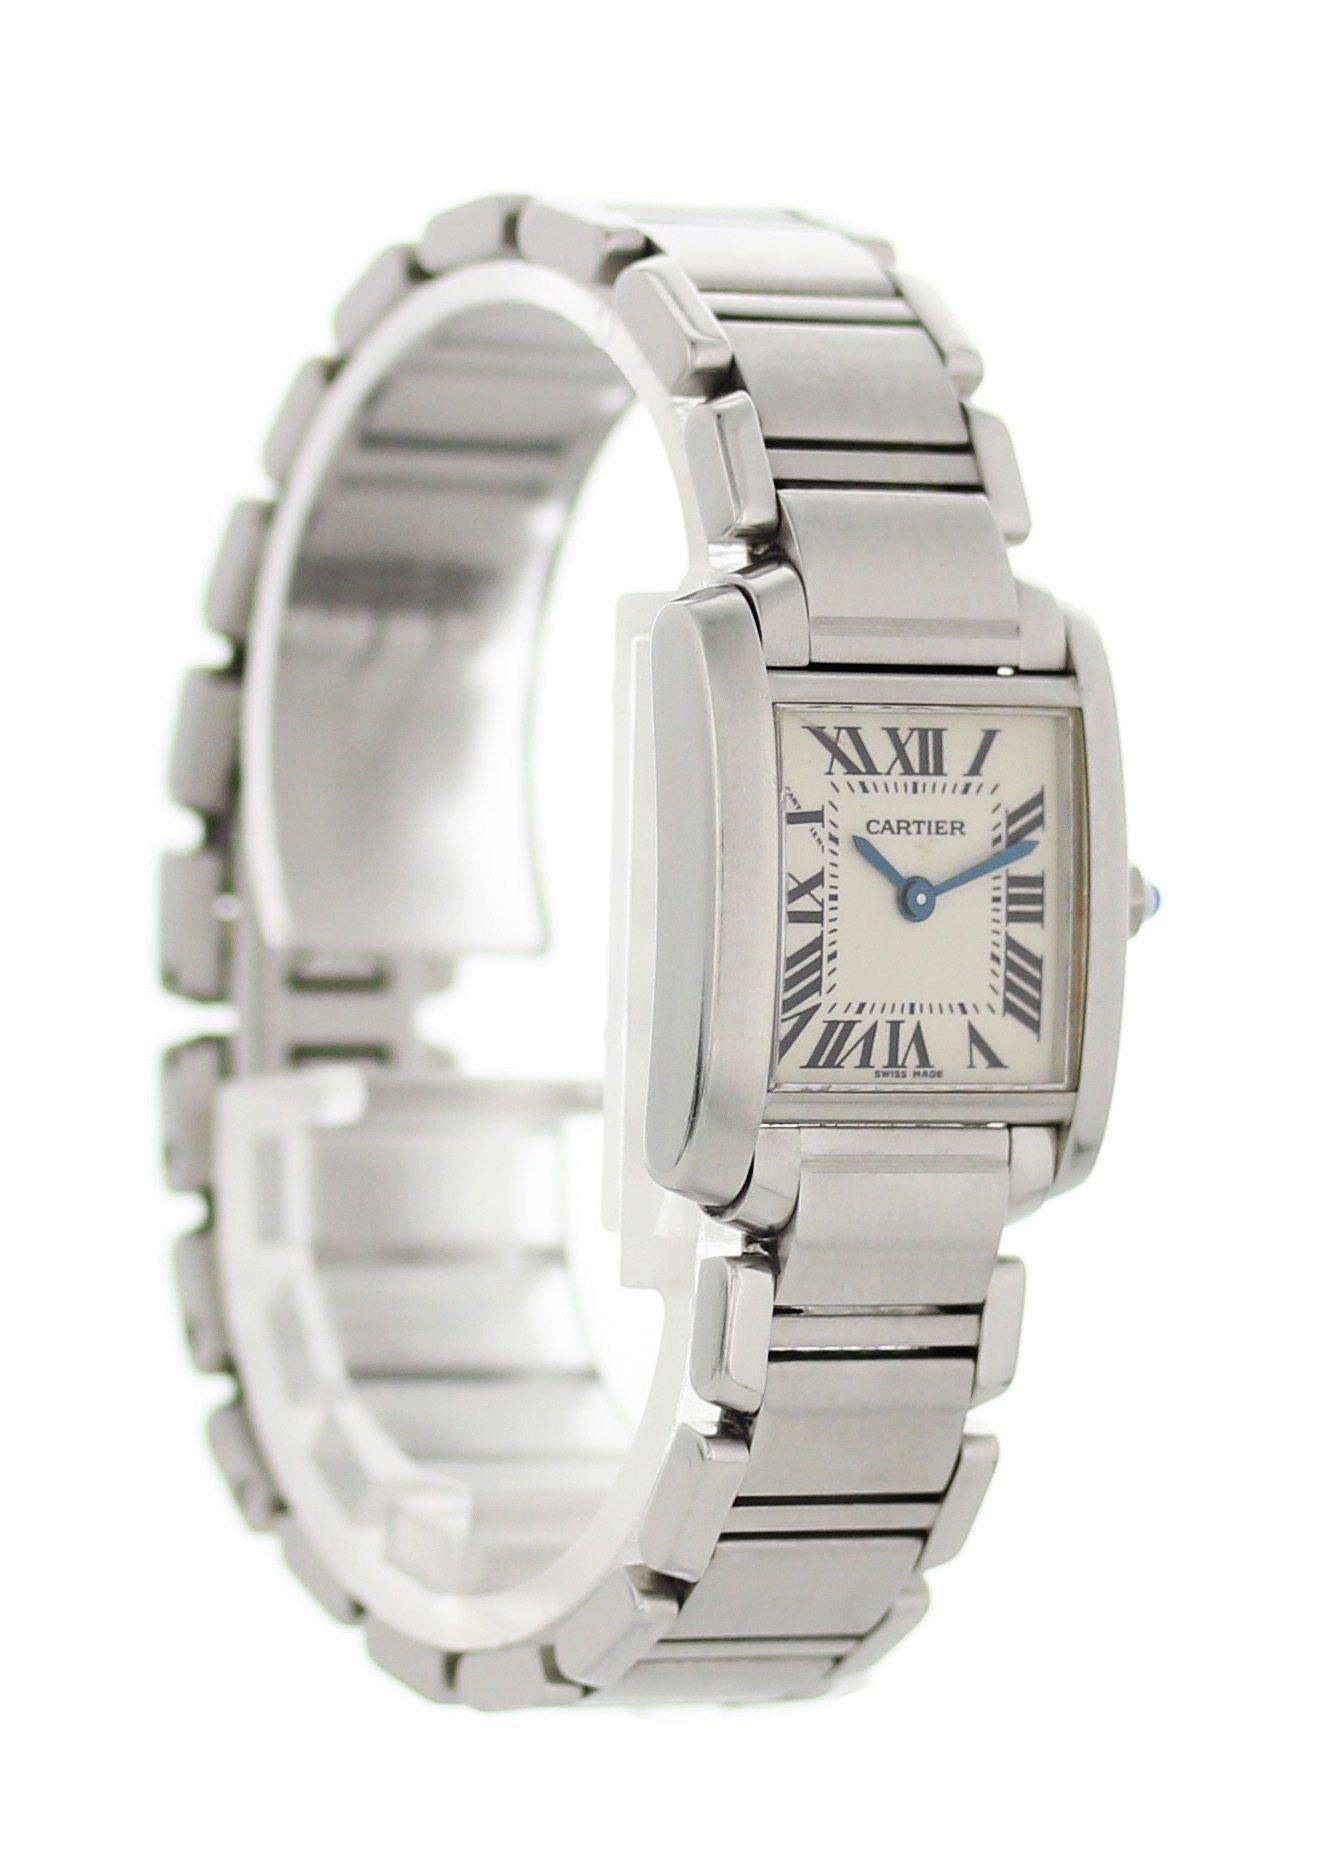 Cartier Tank Francaise 2384 Ladies Watch In Excellent Condition For Sale In New York, NY